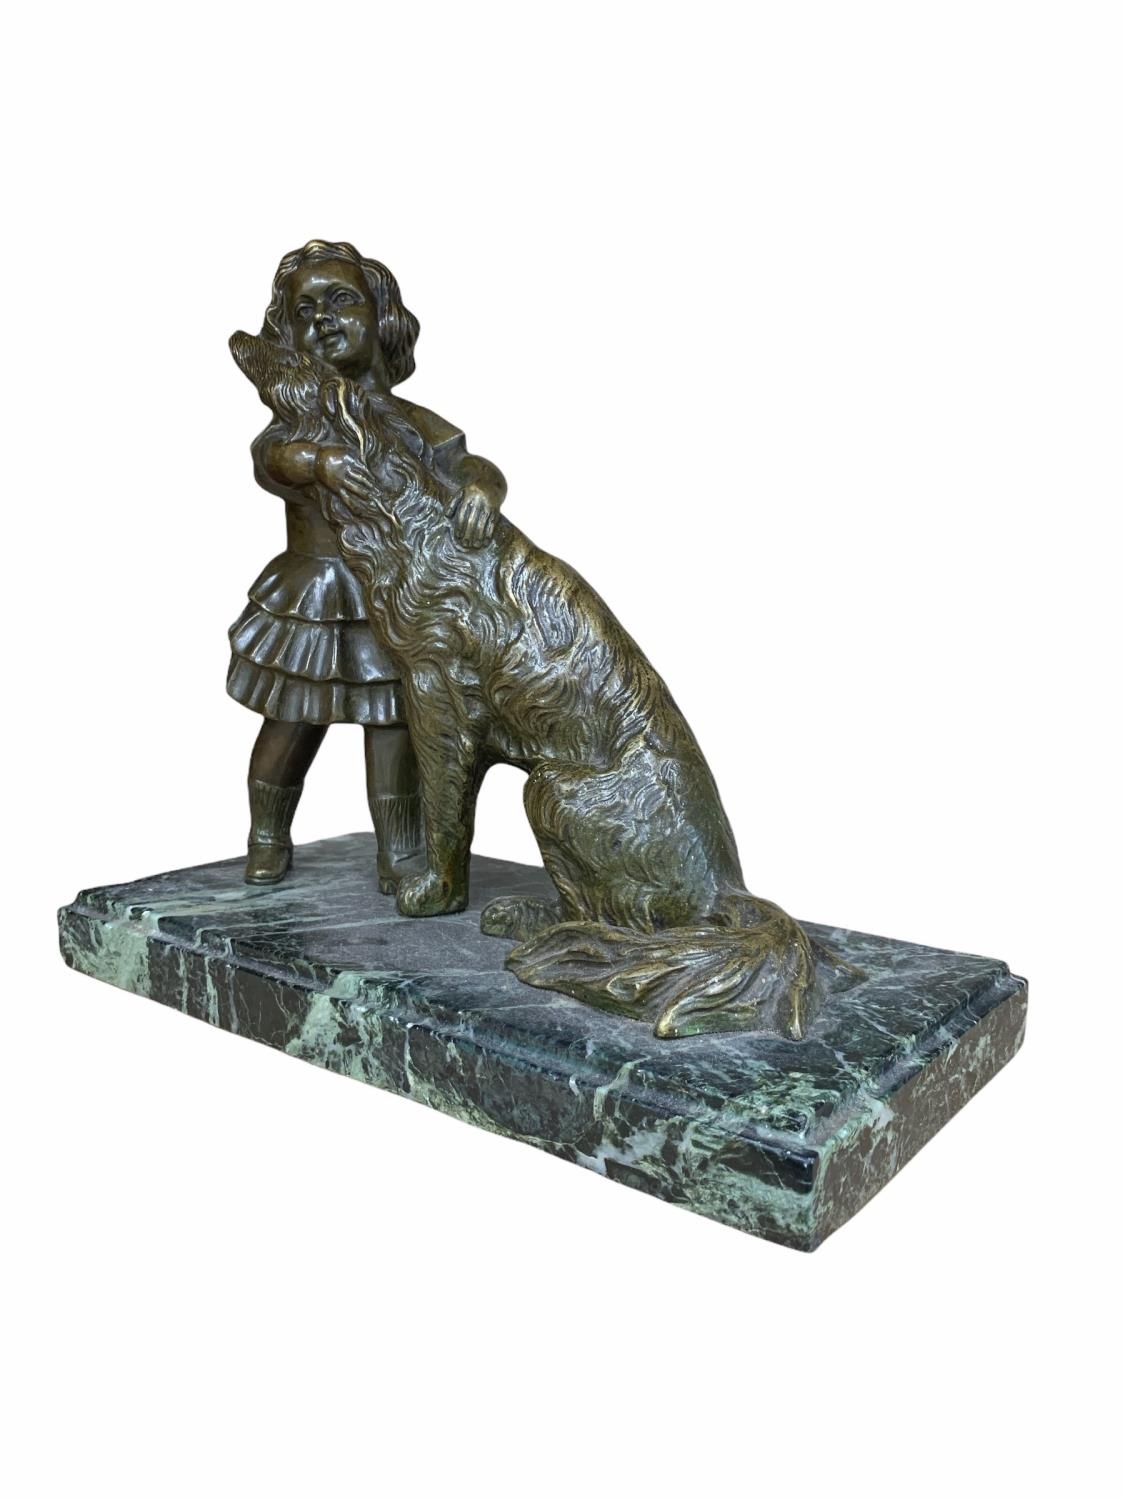 J. FOES, BRONZE FIGURE, GIRL STANDING WITH DOG Raised on a marble plinth base, signed. (h 28cm x d - Image 4 of 4